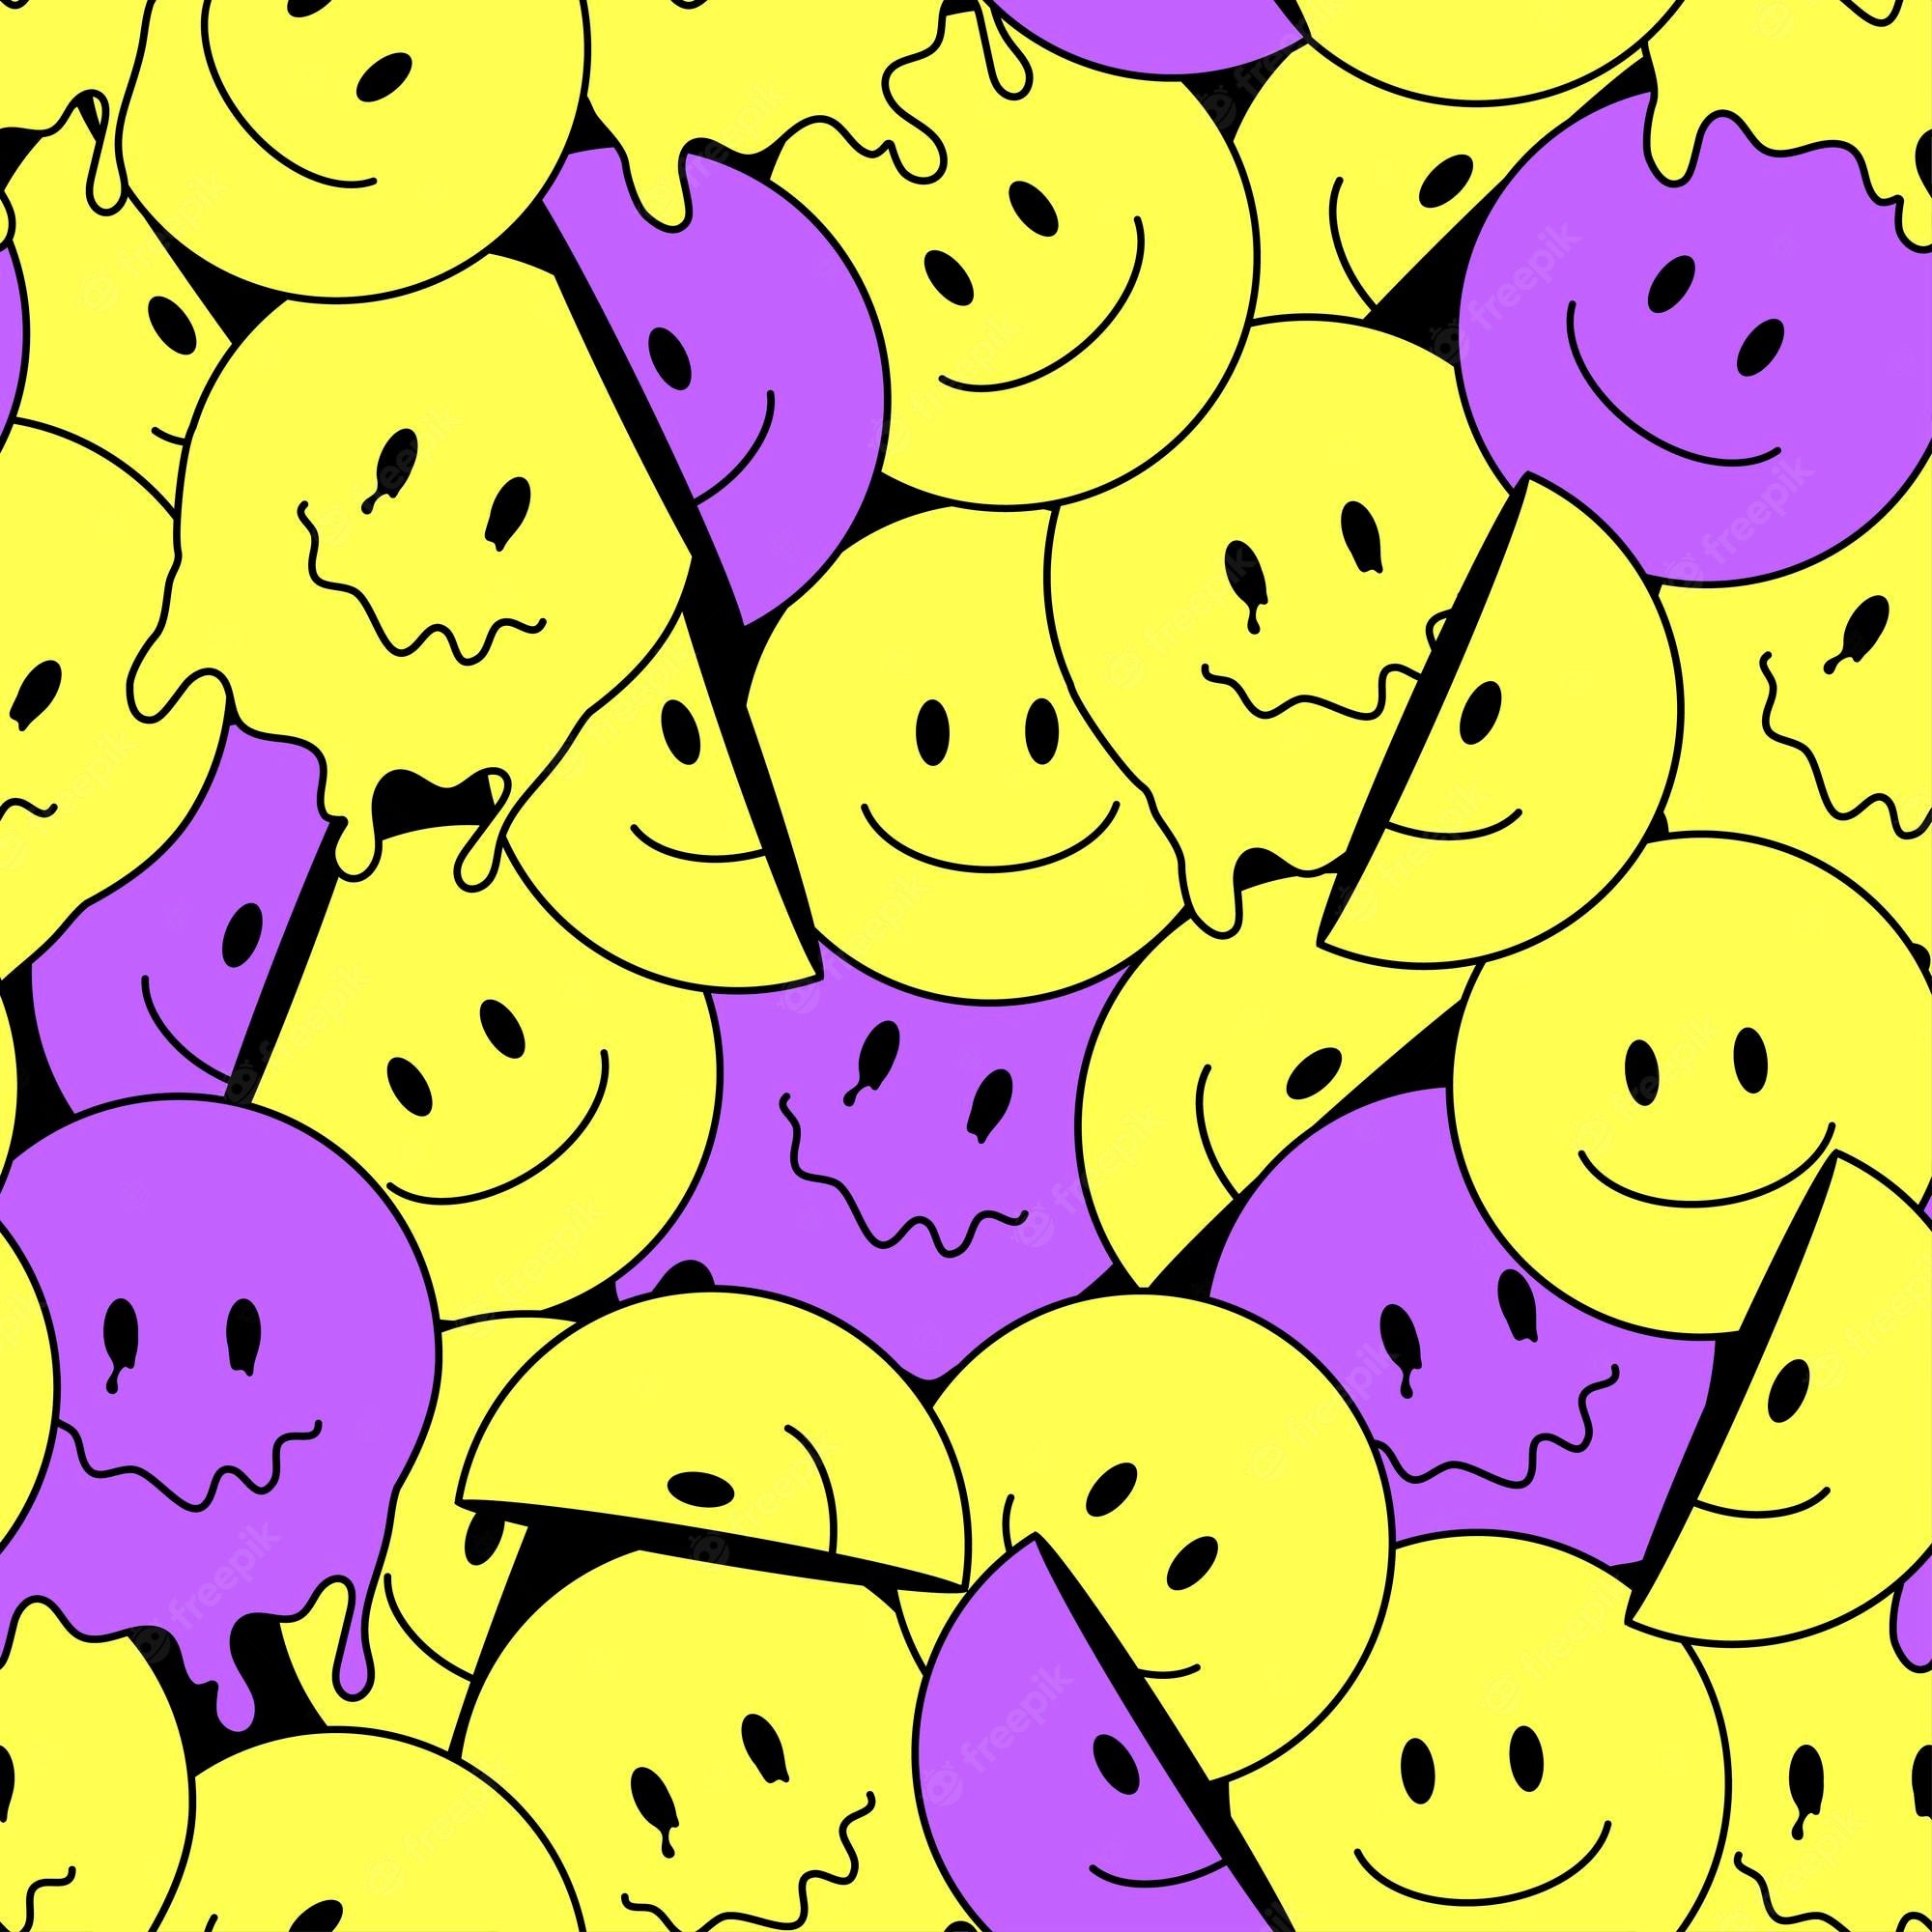 Premium Vector. Funny smile crazy melted face seamless pattern art vector illustration psychedelic retrro graphic positive good vibes smiley faces acid high melt trip wallpaper seamless pattern y2k aesthetic